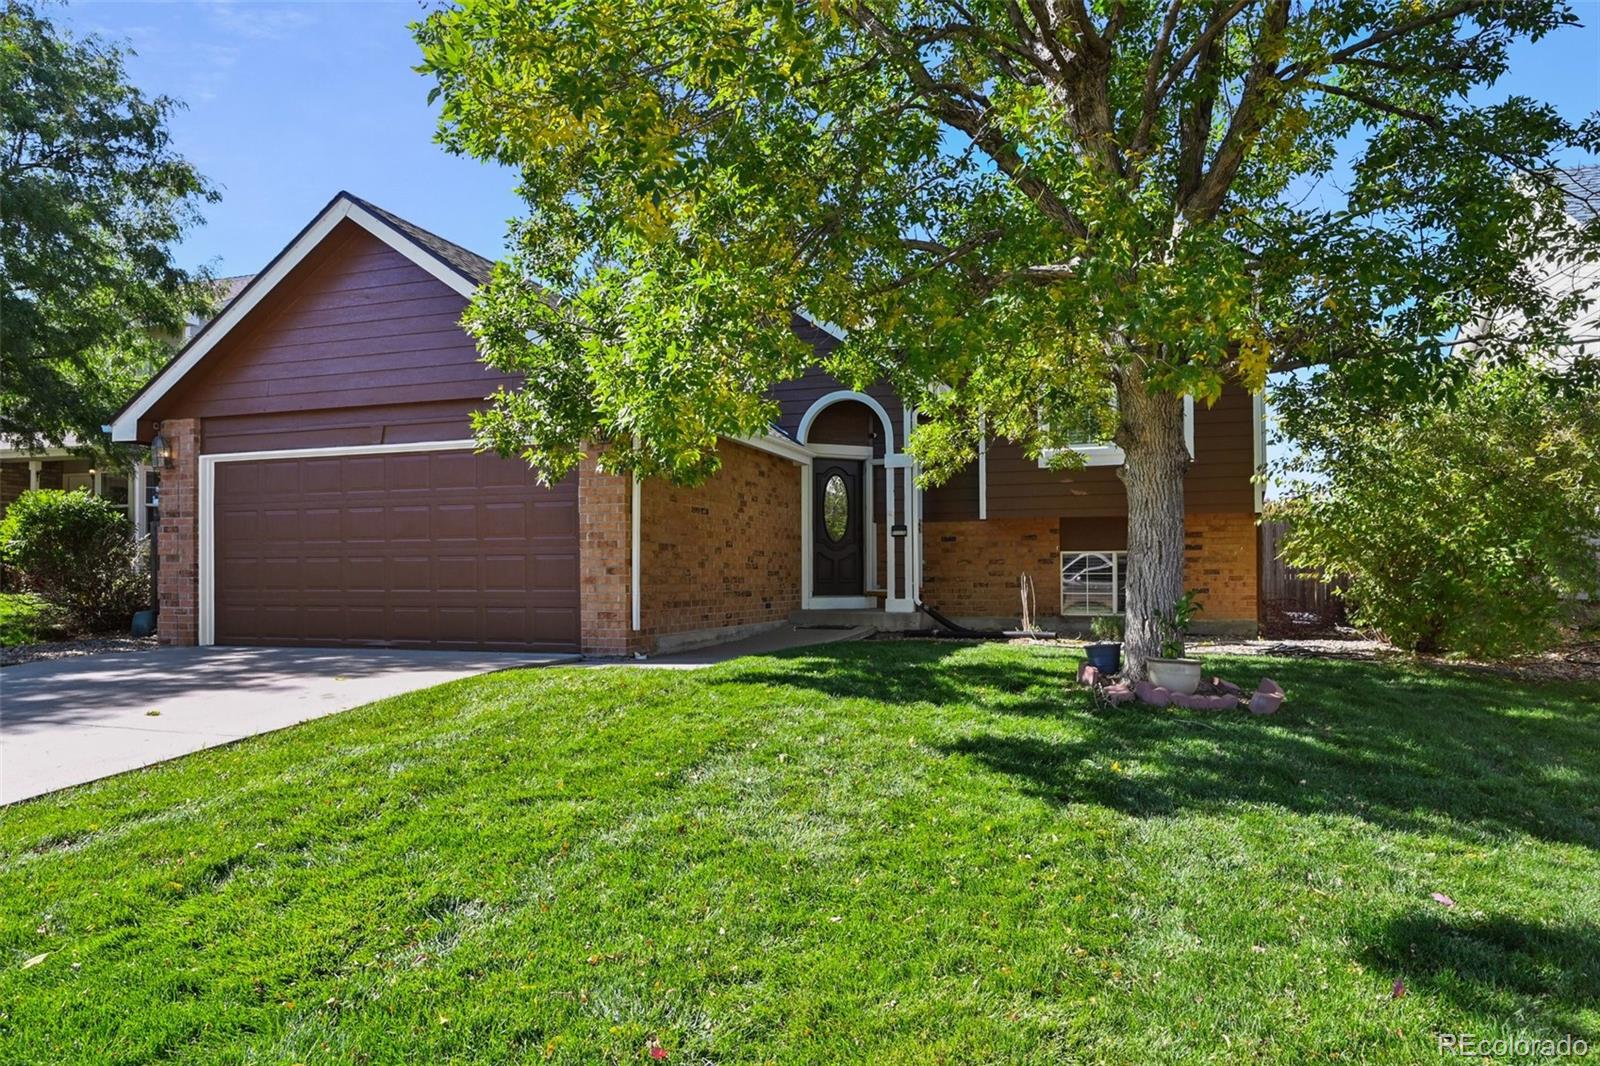 18531 e linvale place, aurora sold home. Closed on 2023-12-29 for $484,900.